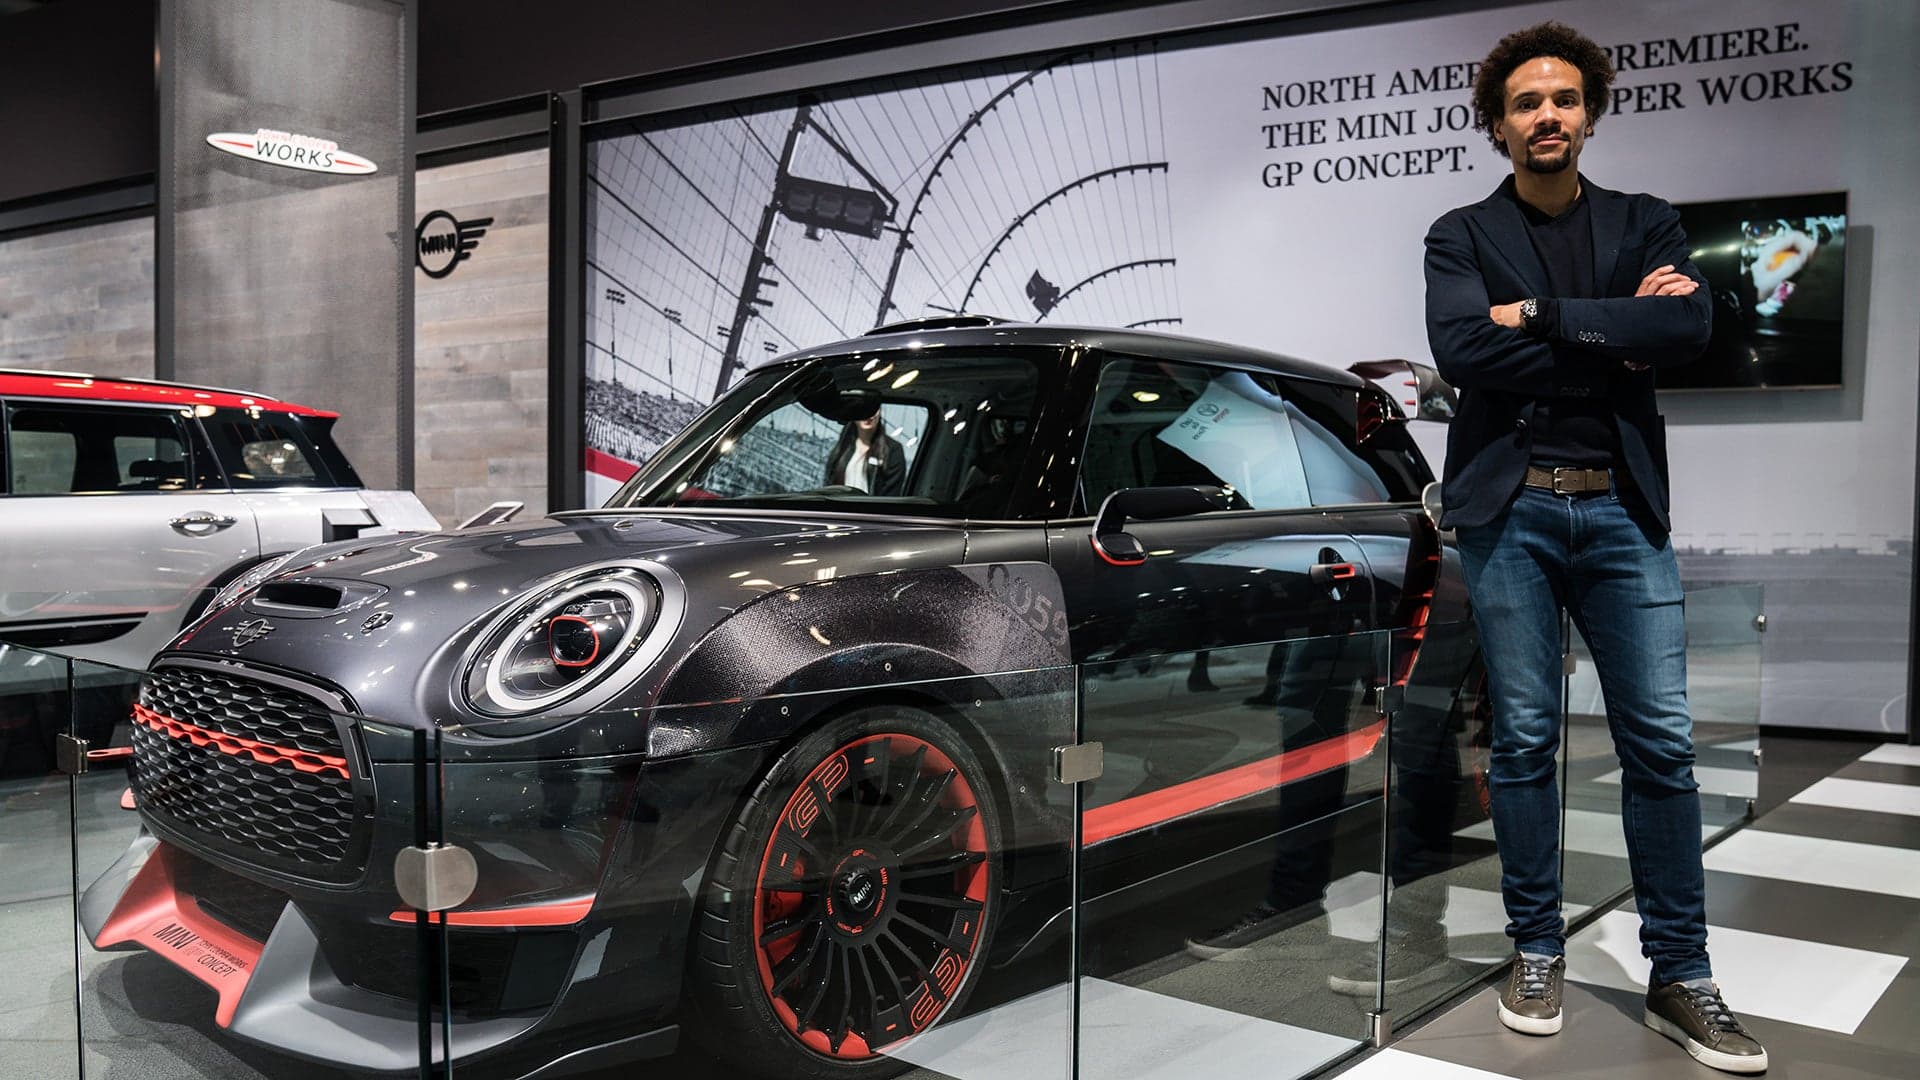 Mini Design Head Oliver Heilmer Talks the Ways 3D Printing Could Change How Cars Look